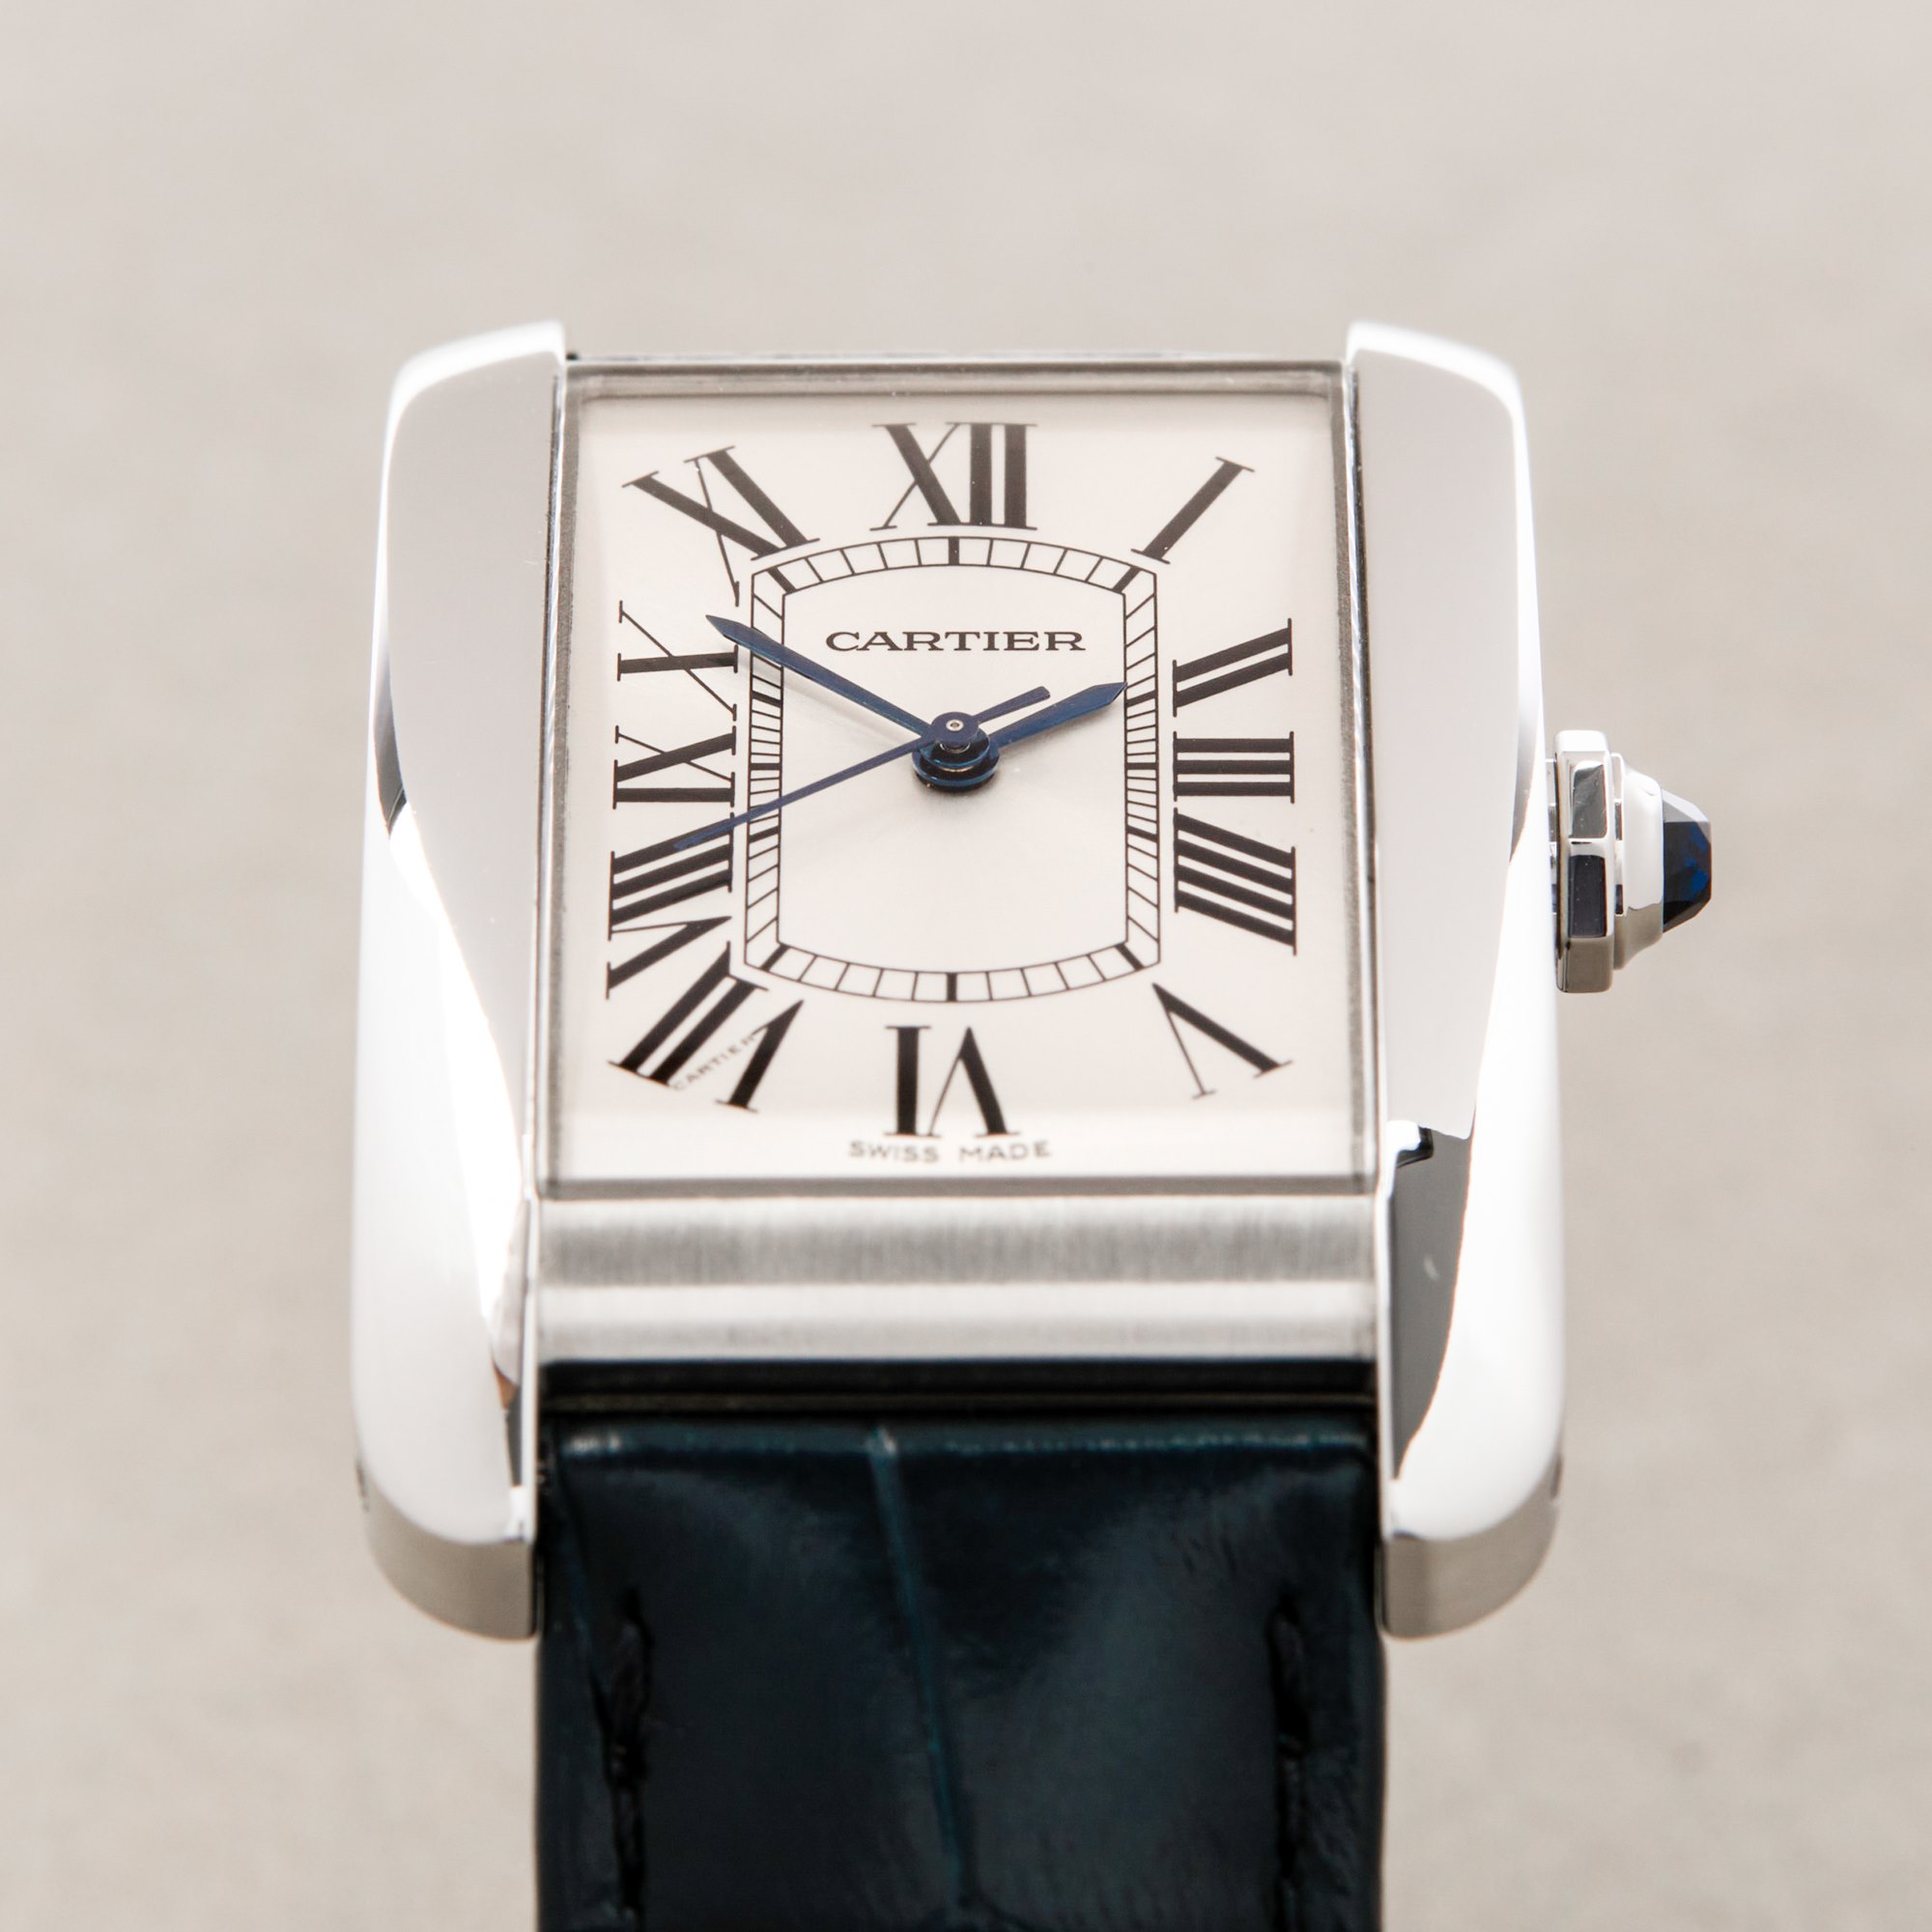 Cartier Tank Americaine Stainless Steel WSTA0018 or 3972